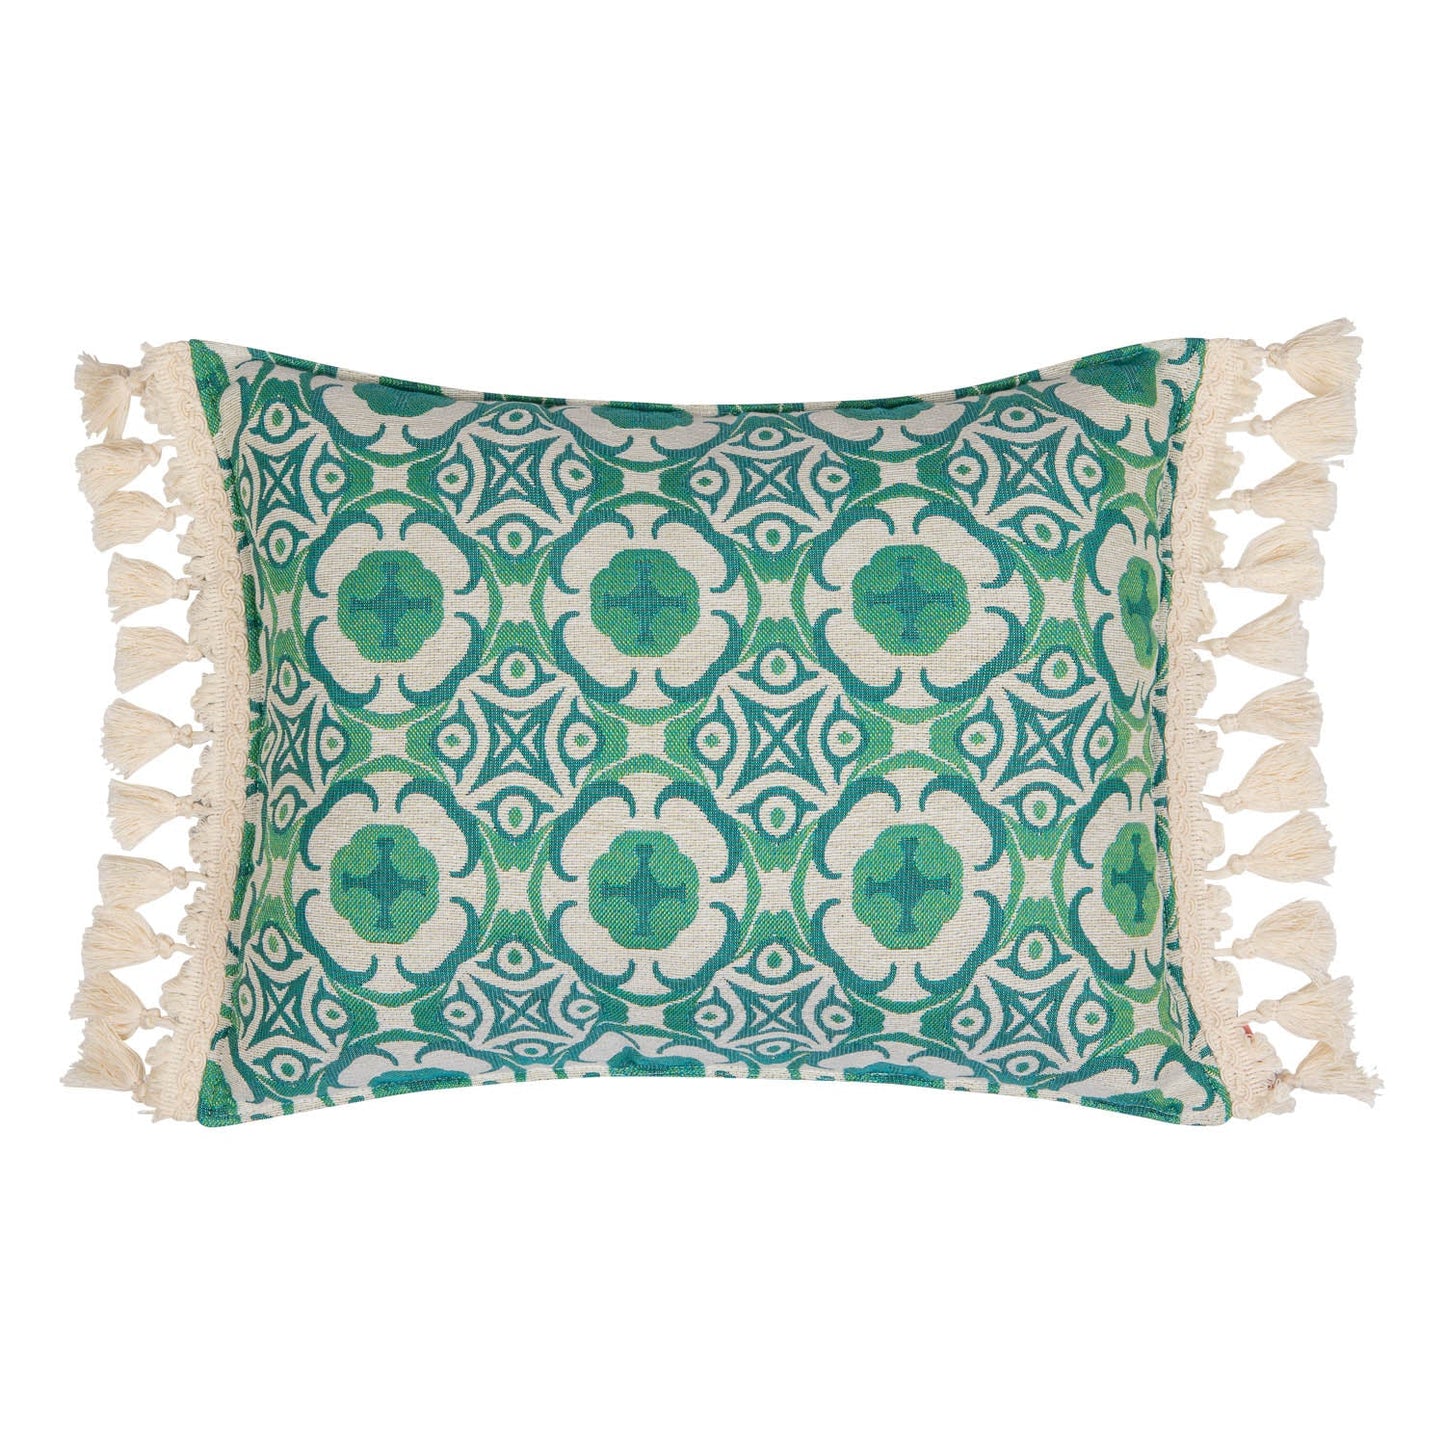 "Ocean Daisy" Pillow with Fringe